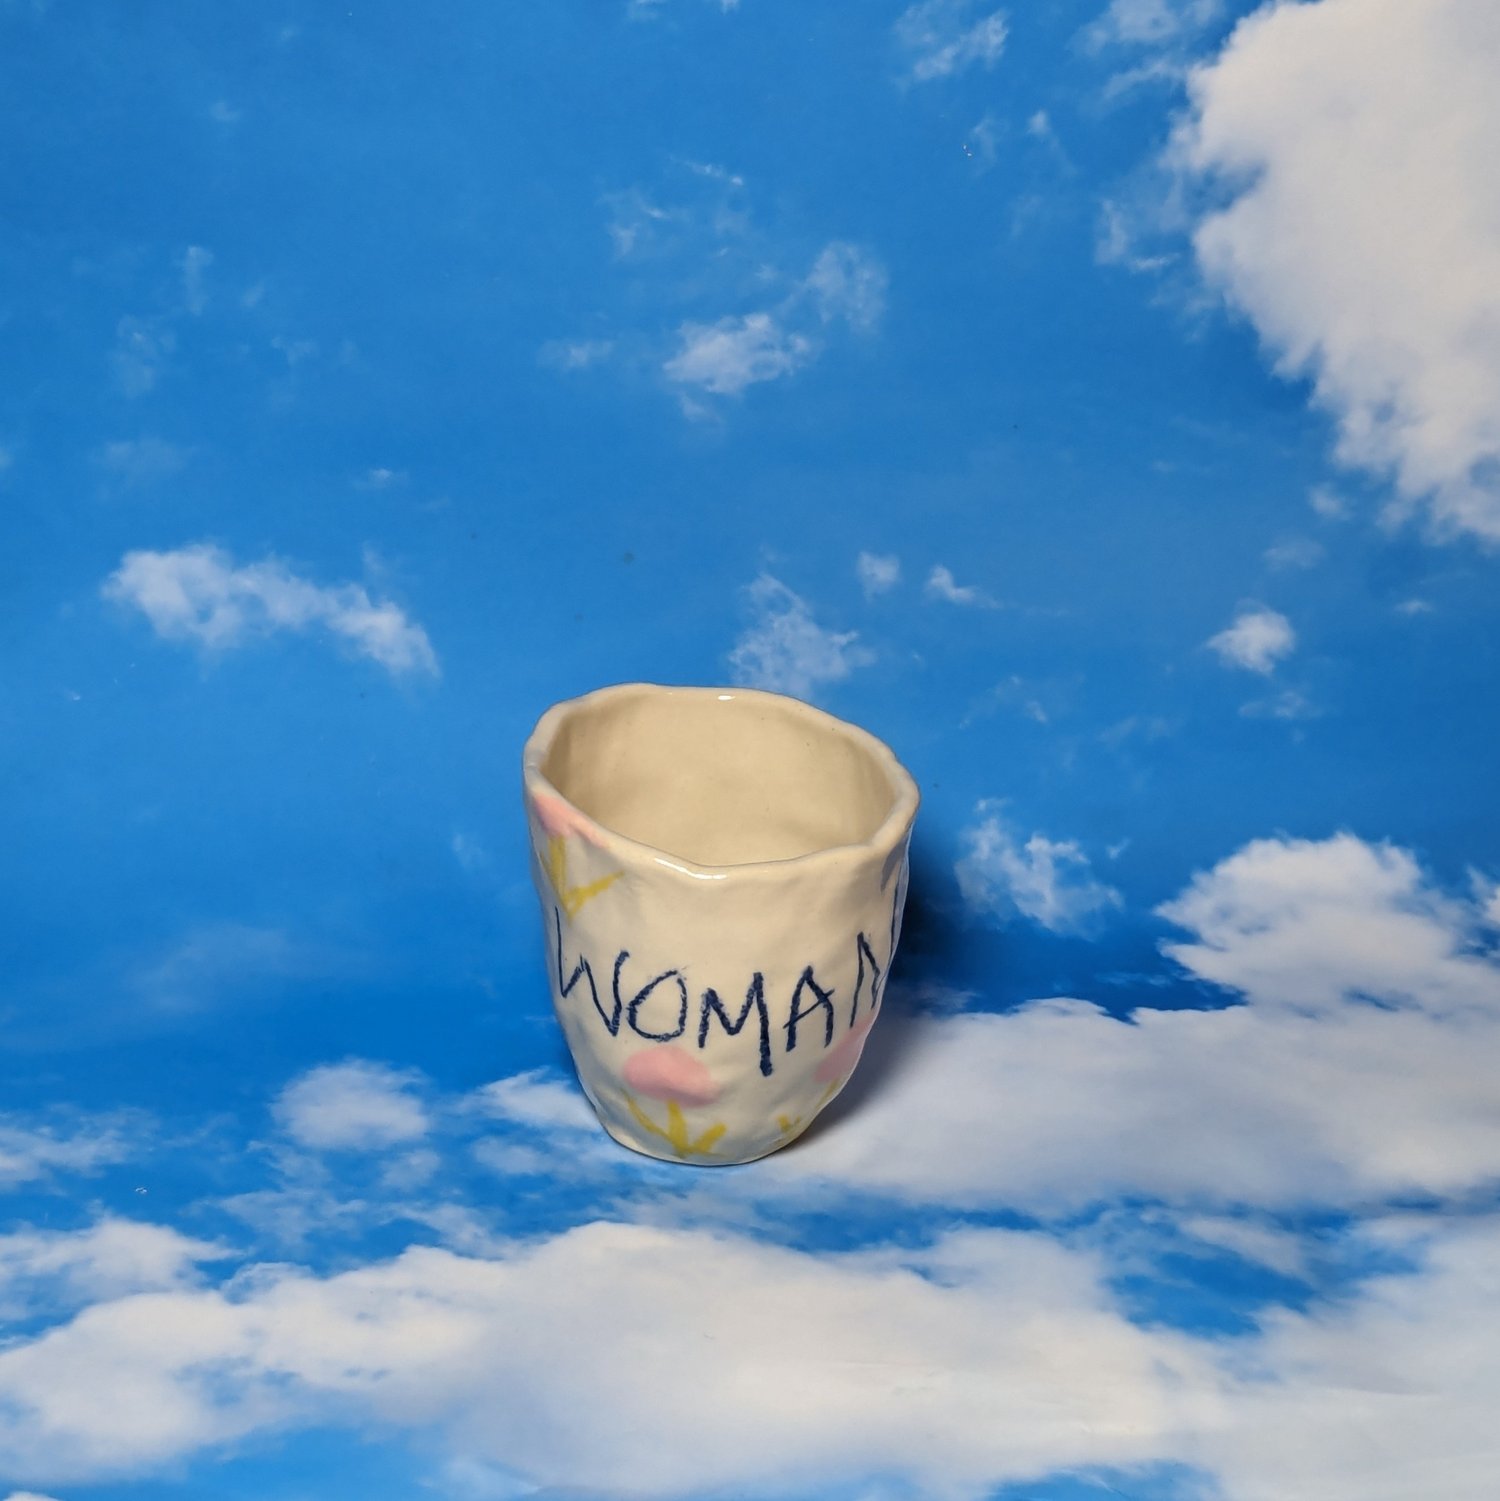 Image of woman latte cup